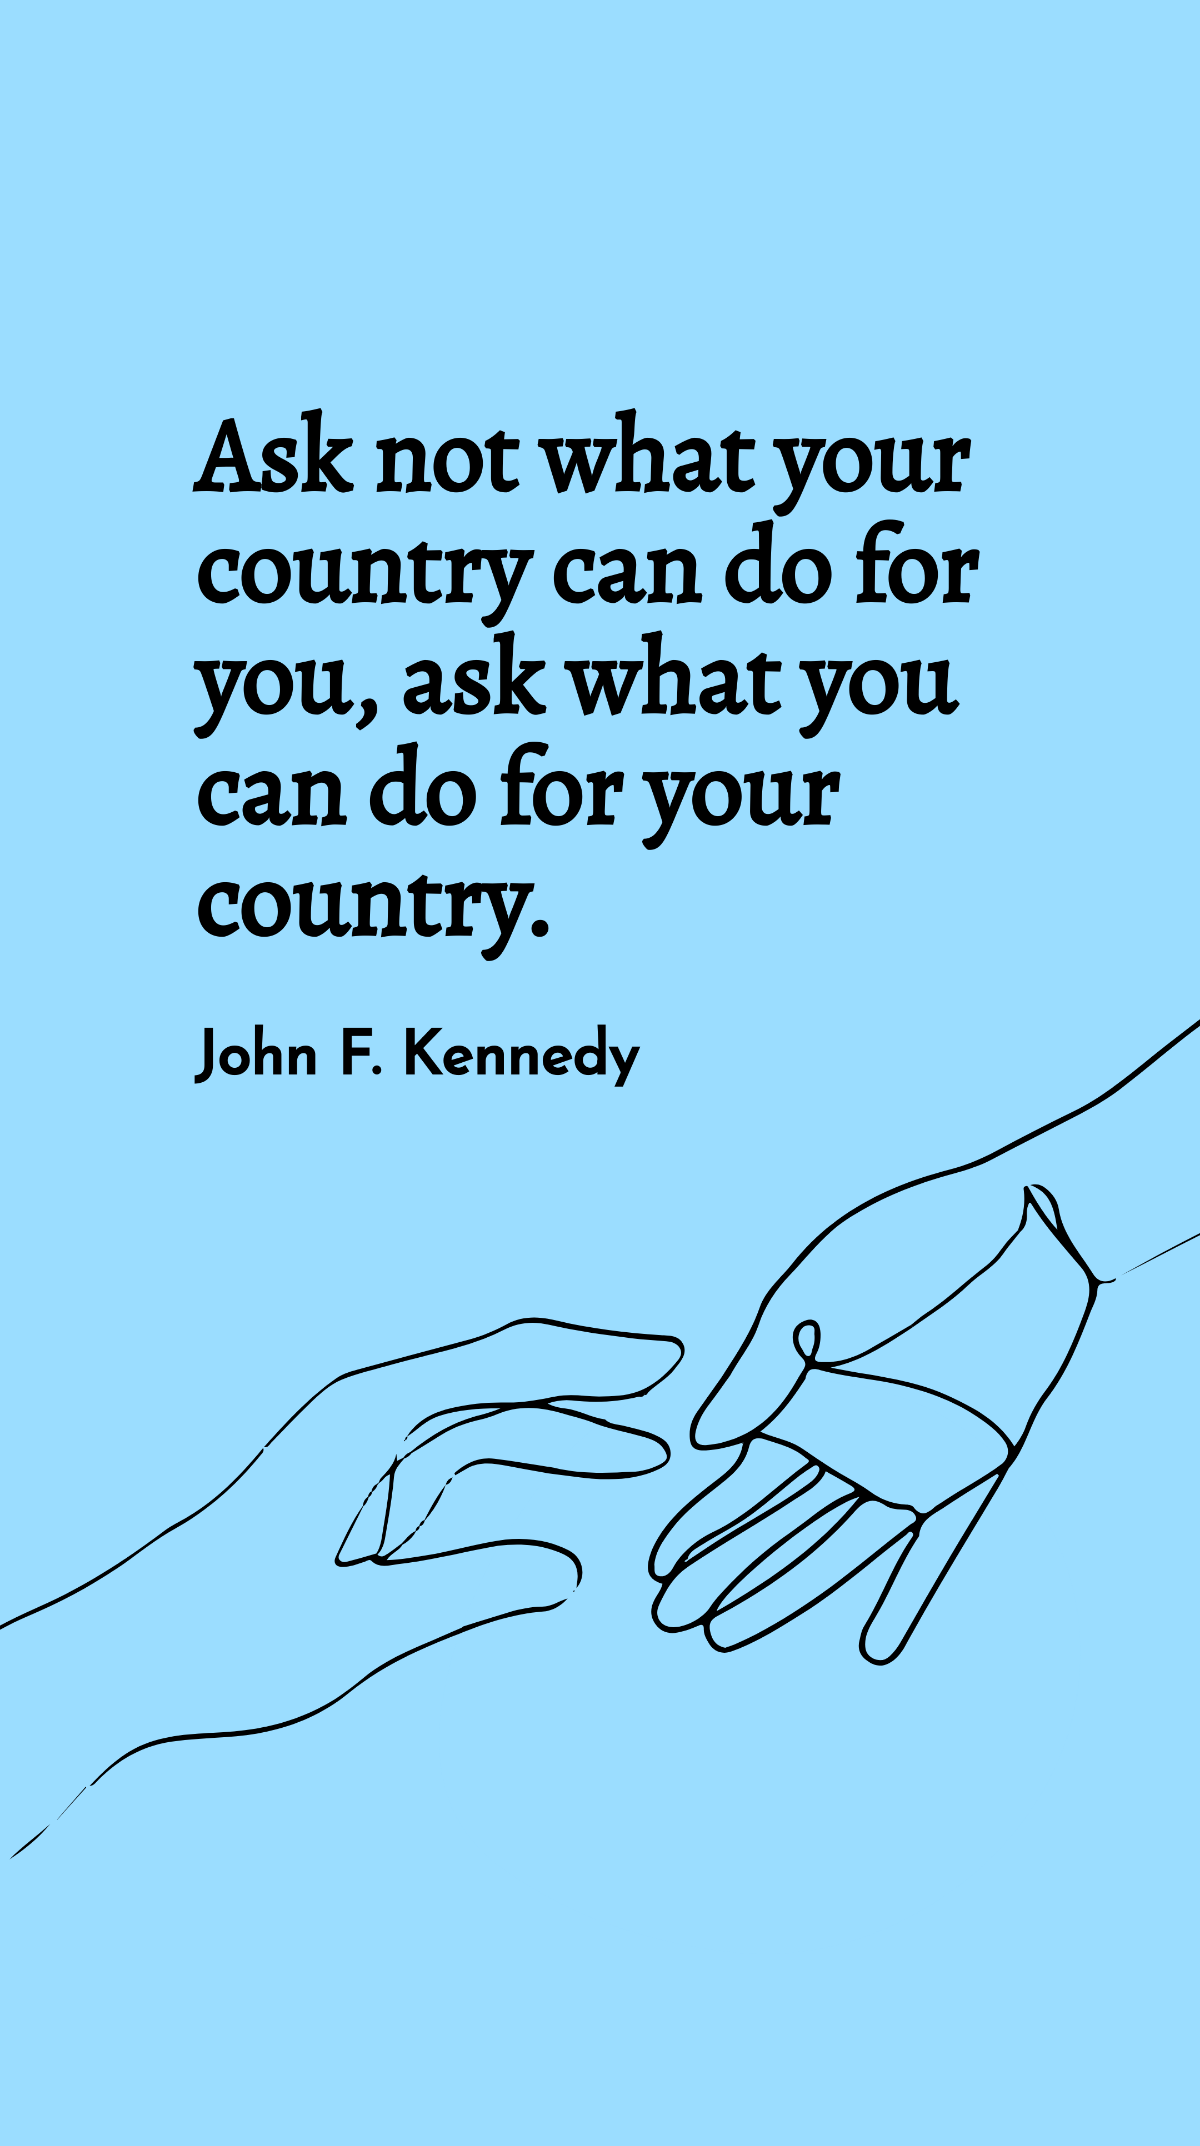 John F. Kennedy - Ask not what your country can do for you, ask what you can do for your country. Template